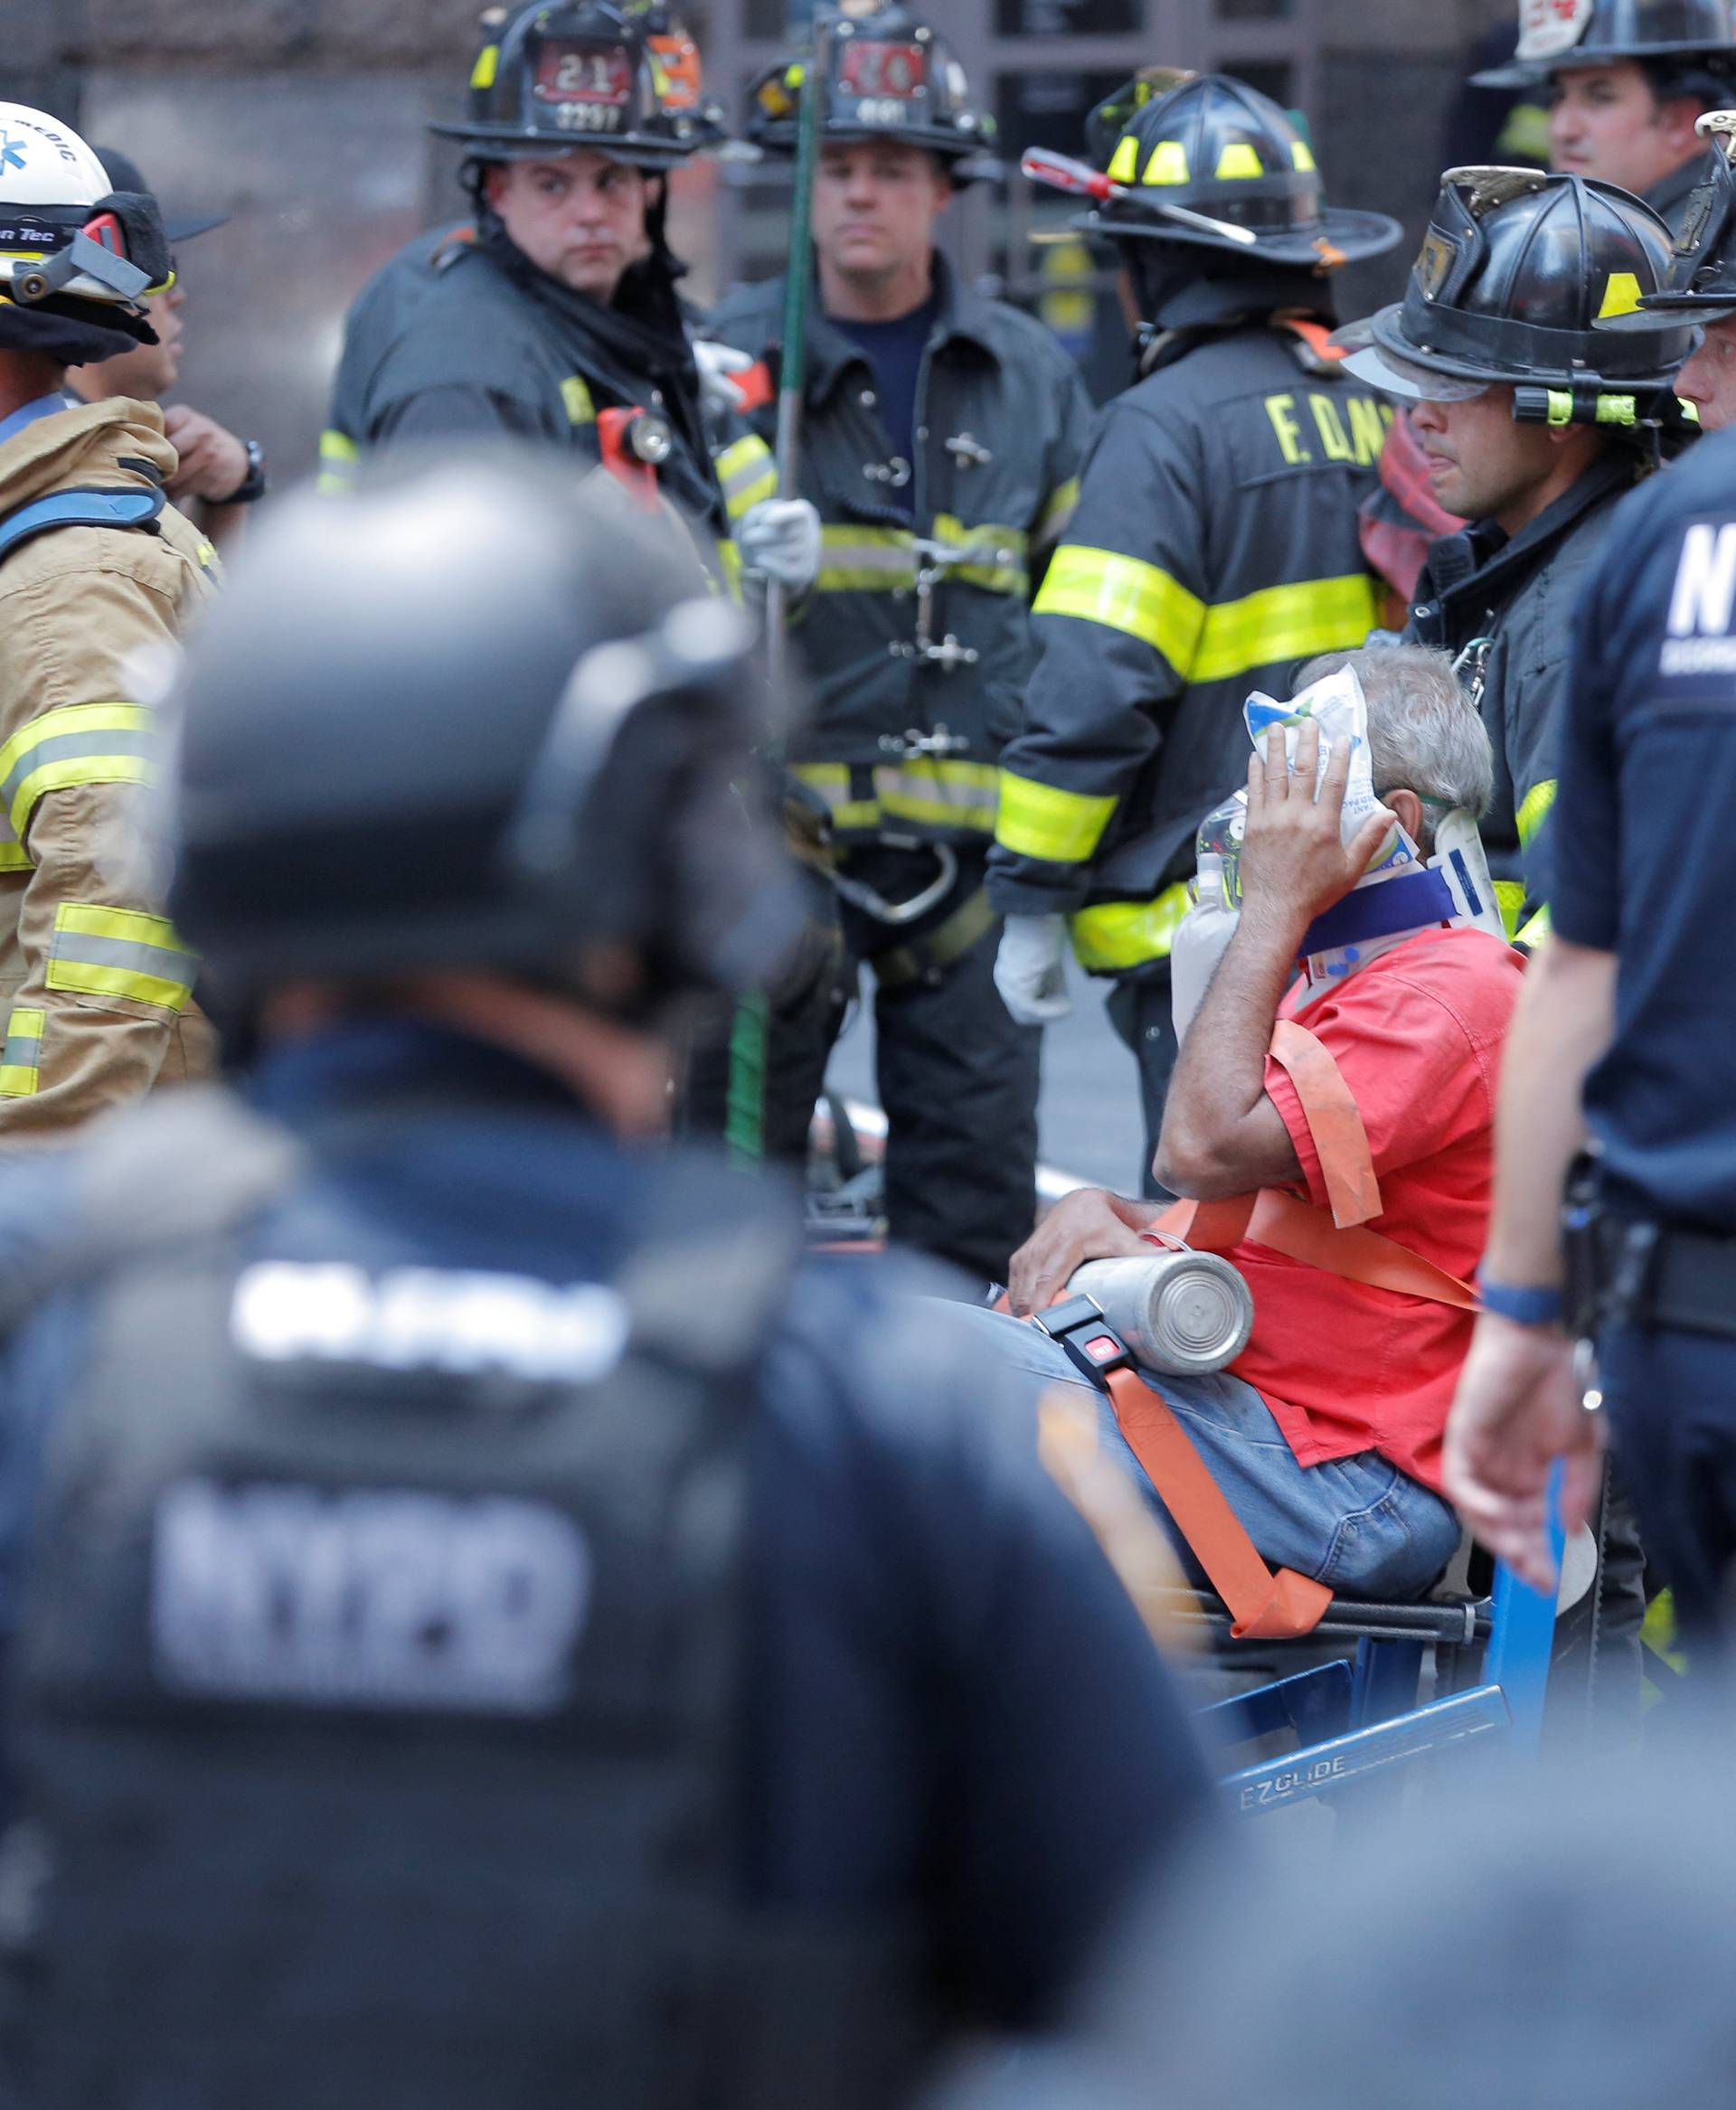 First responders tend to an injured pedestrian after a vehicle struck pedestrians on a sidewalk in Times Square in New York